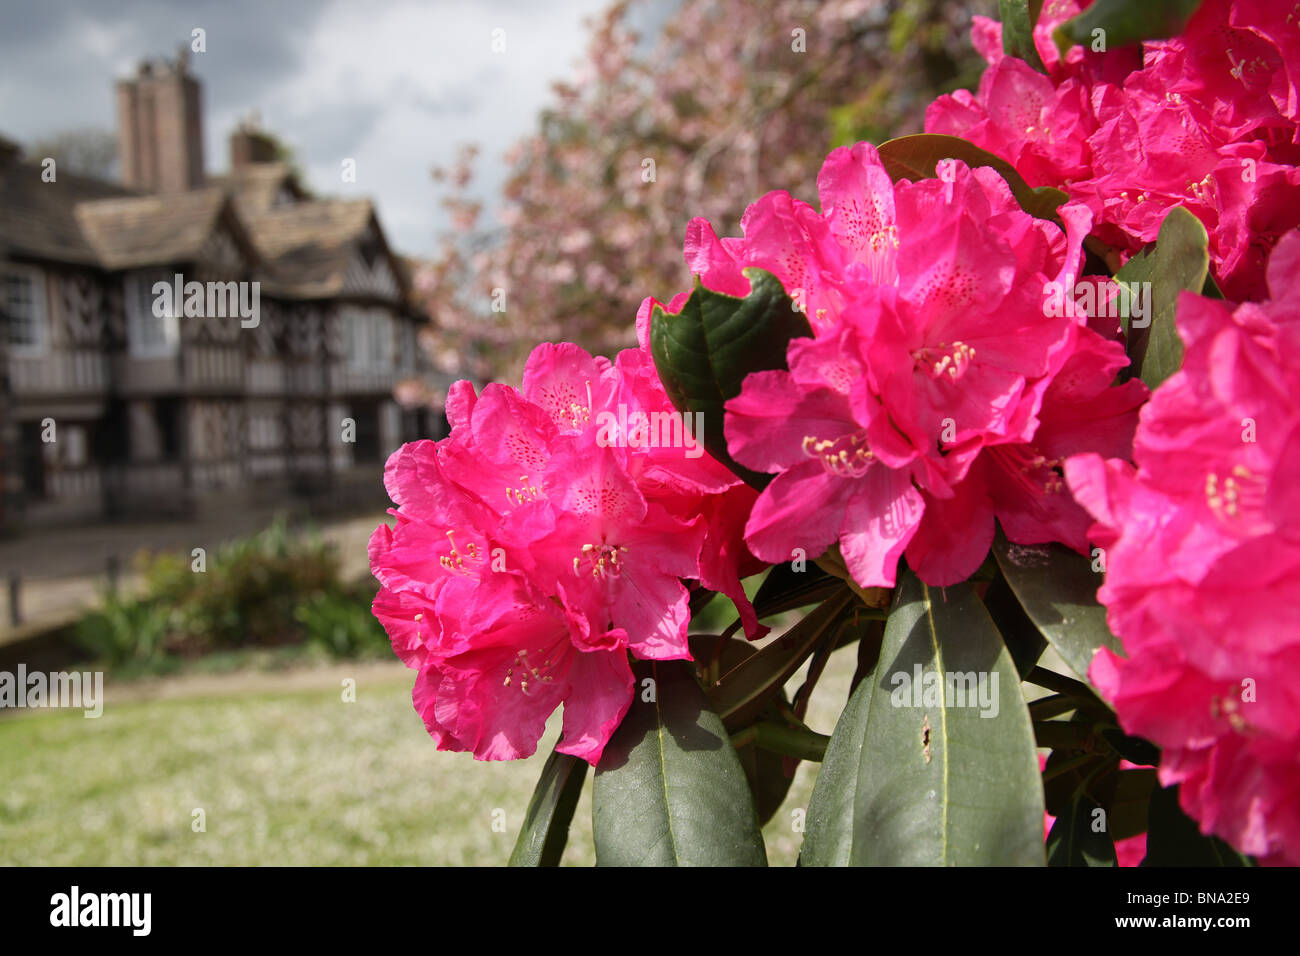 Adlington Hall & Gardens, England. Red rhododendrons in full bloom with the Tudor exterior of Adlington Hall in the background. Stock Photo